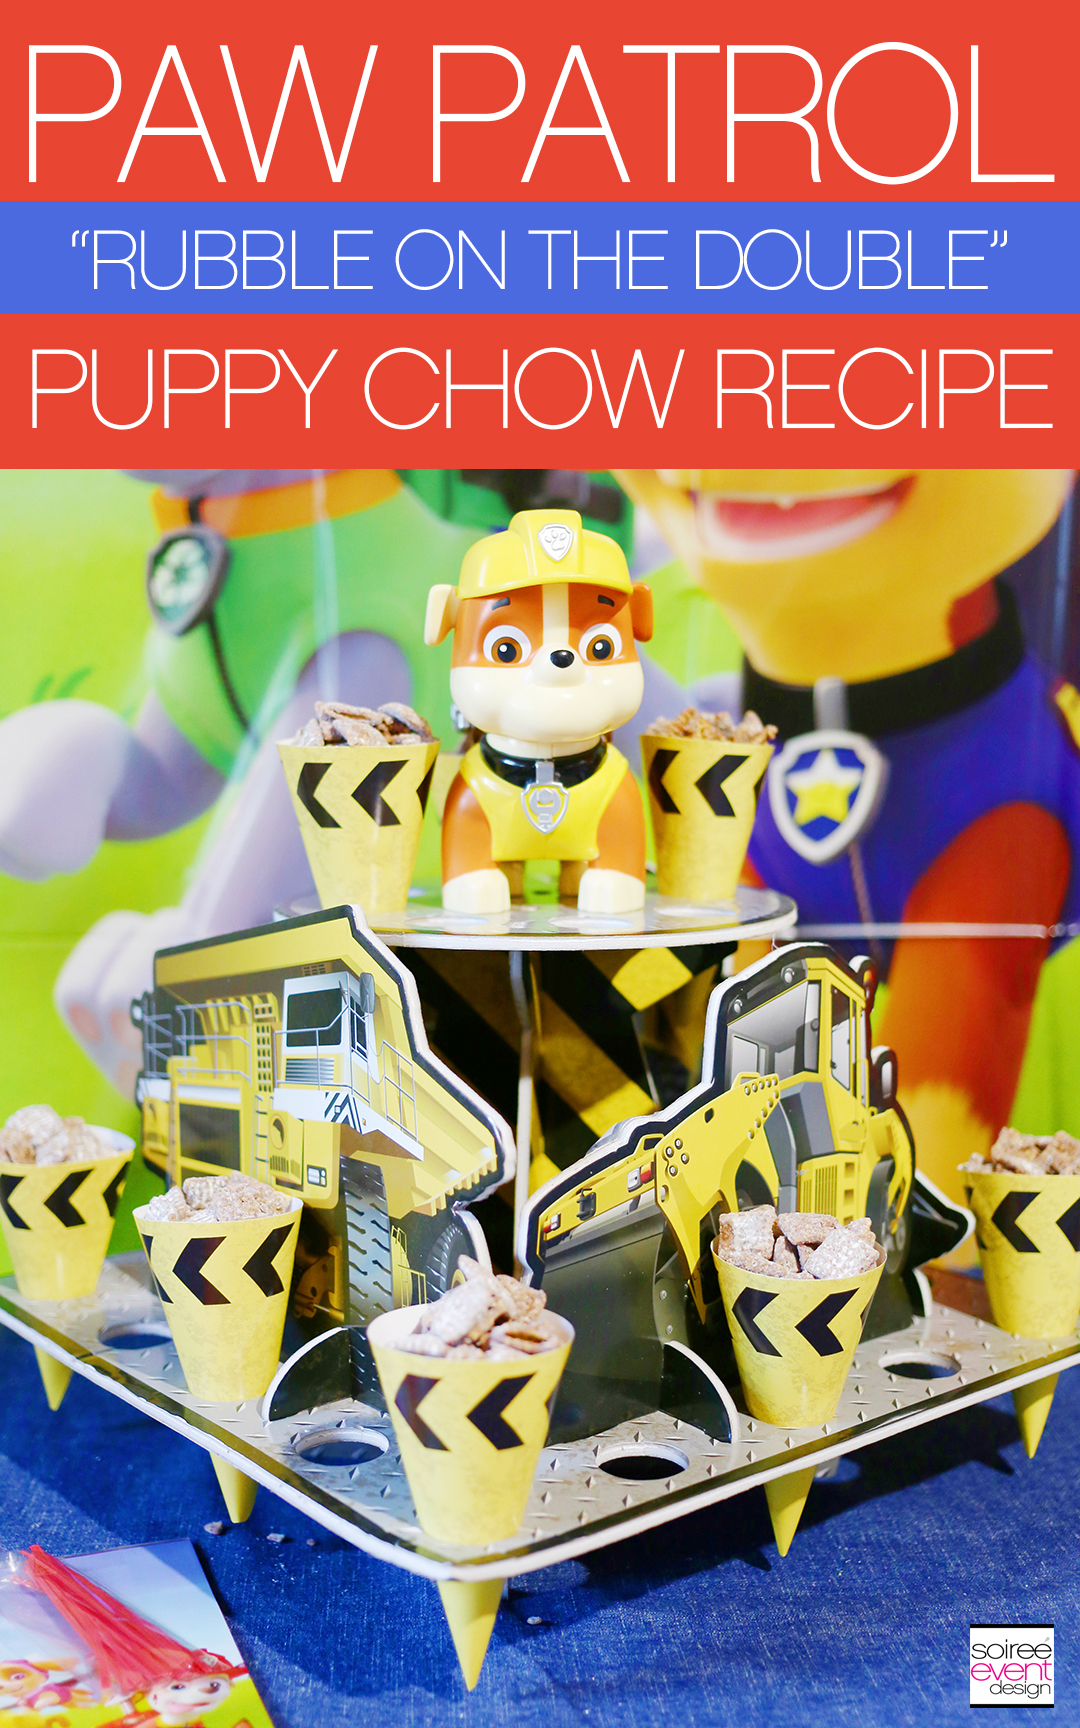 How to Make Paw Patrol Puppy Chow